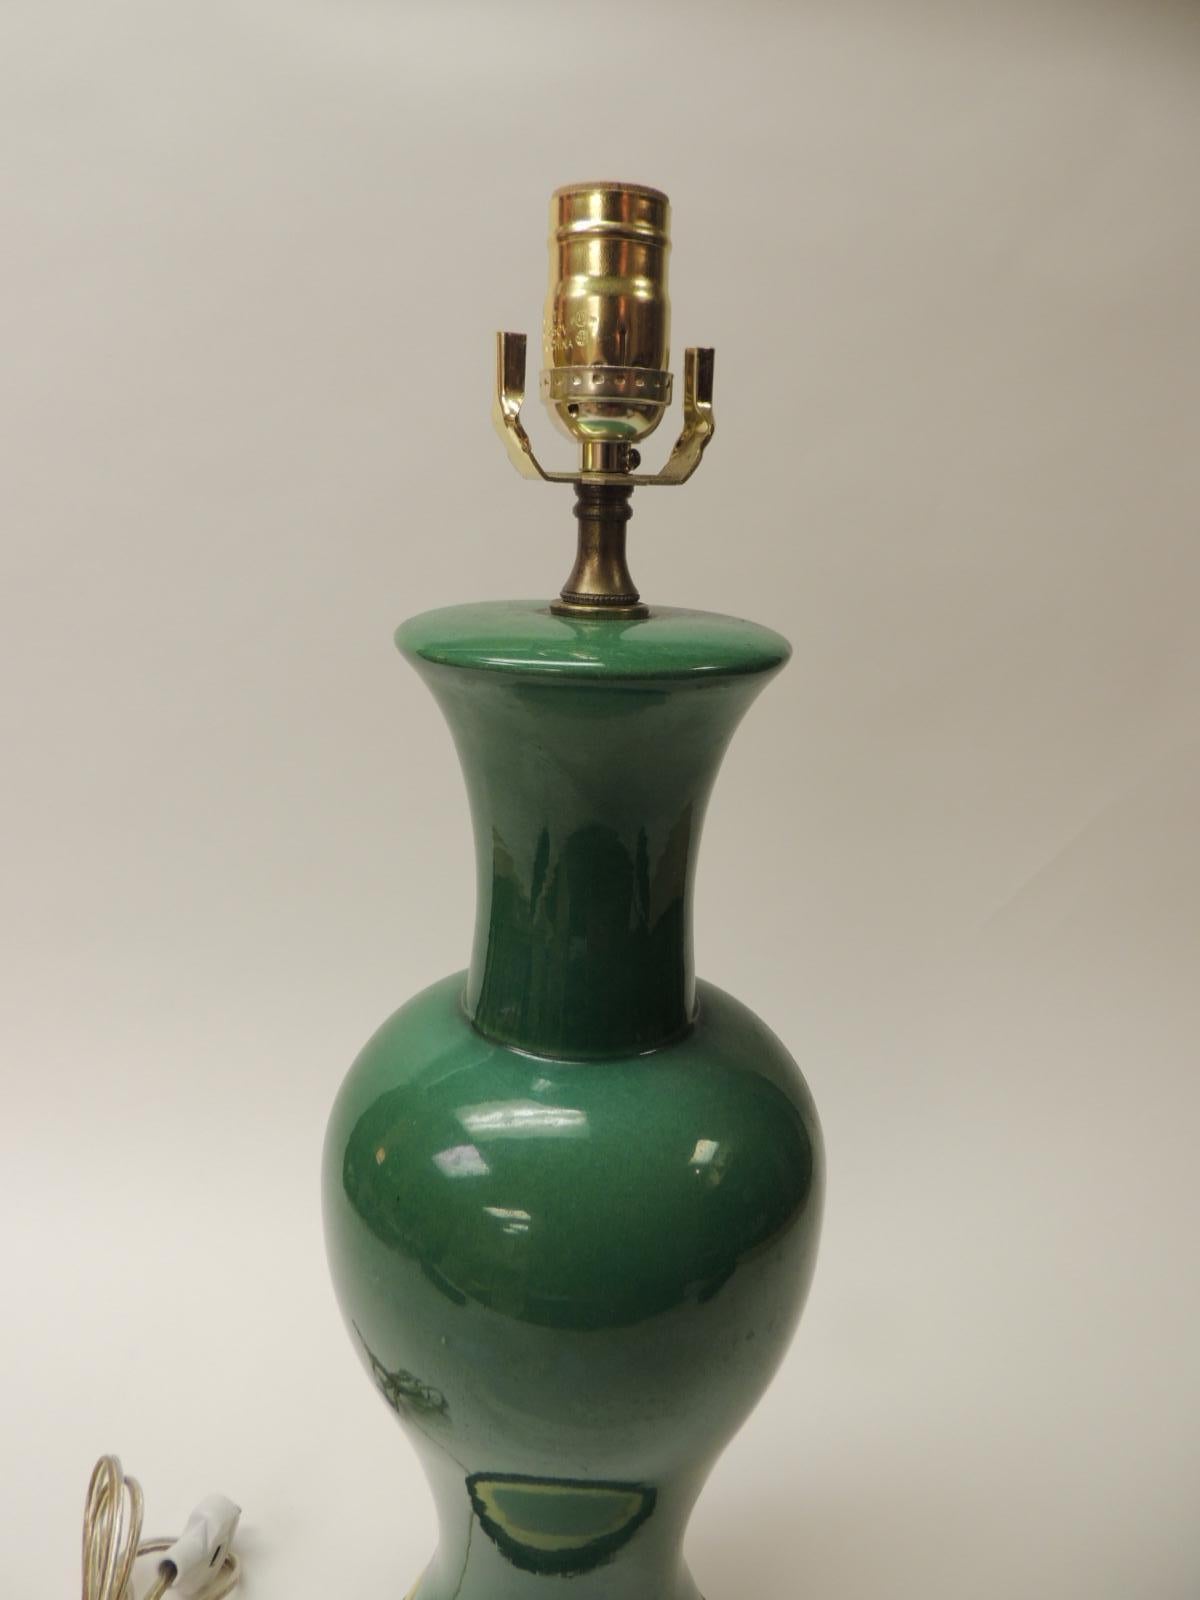 Asian Vintage Green Ceramic Lamp with Brass Fittings